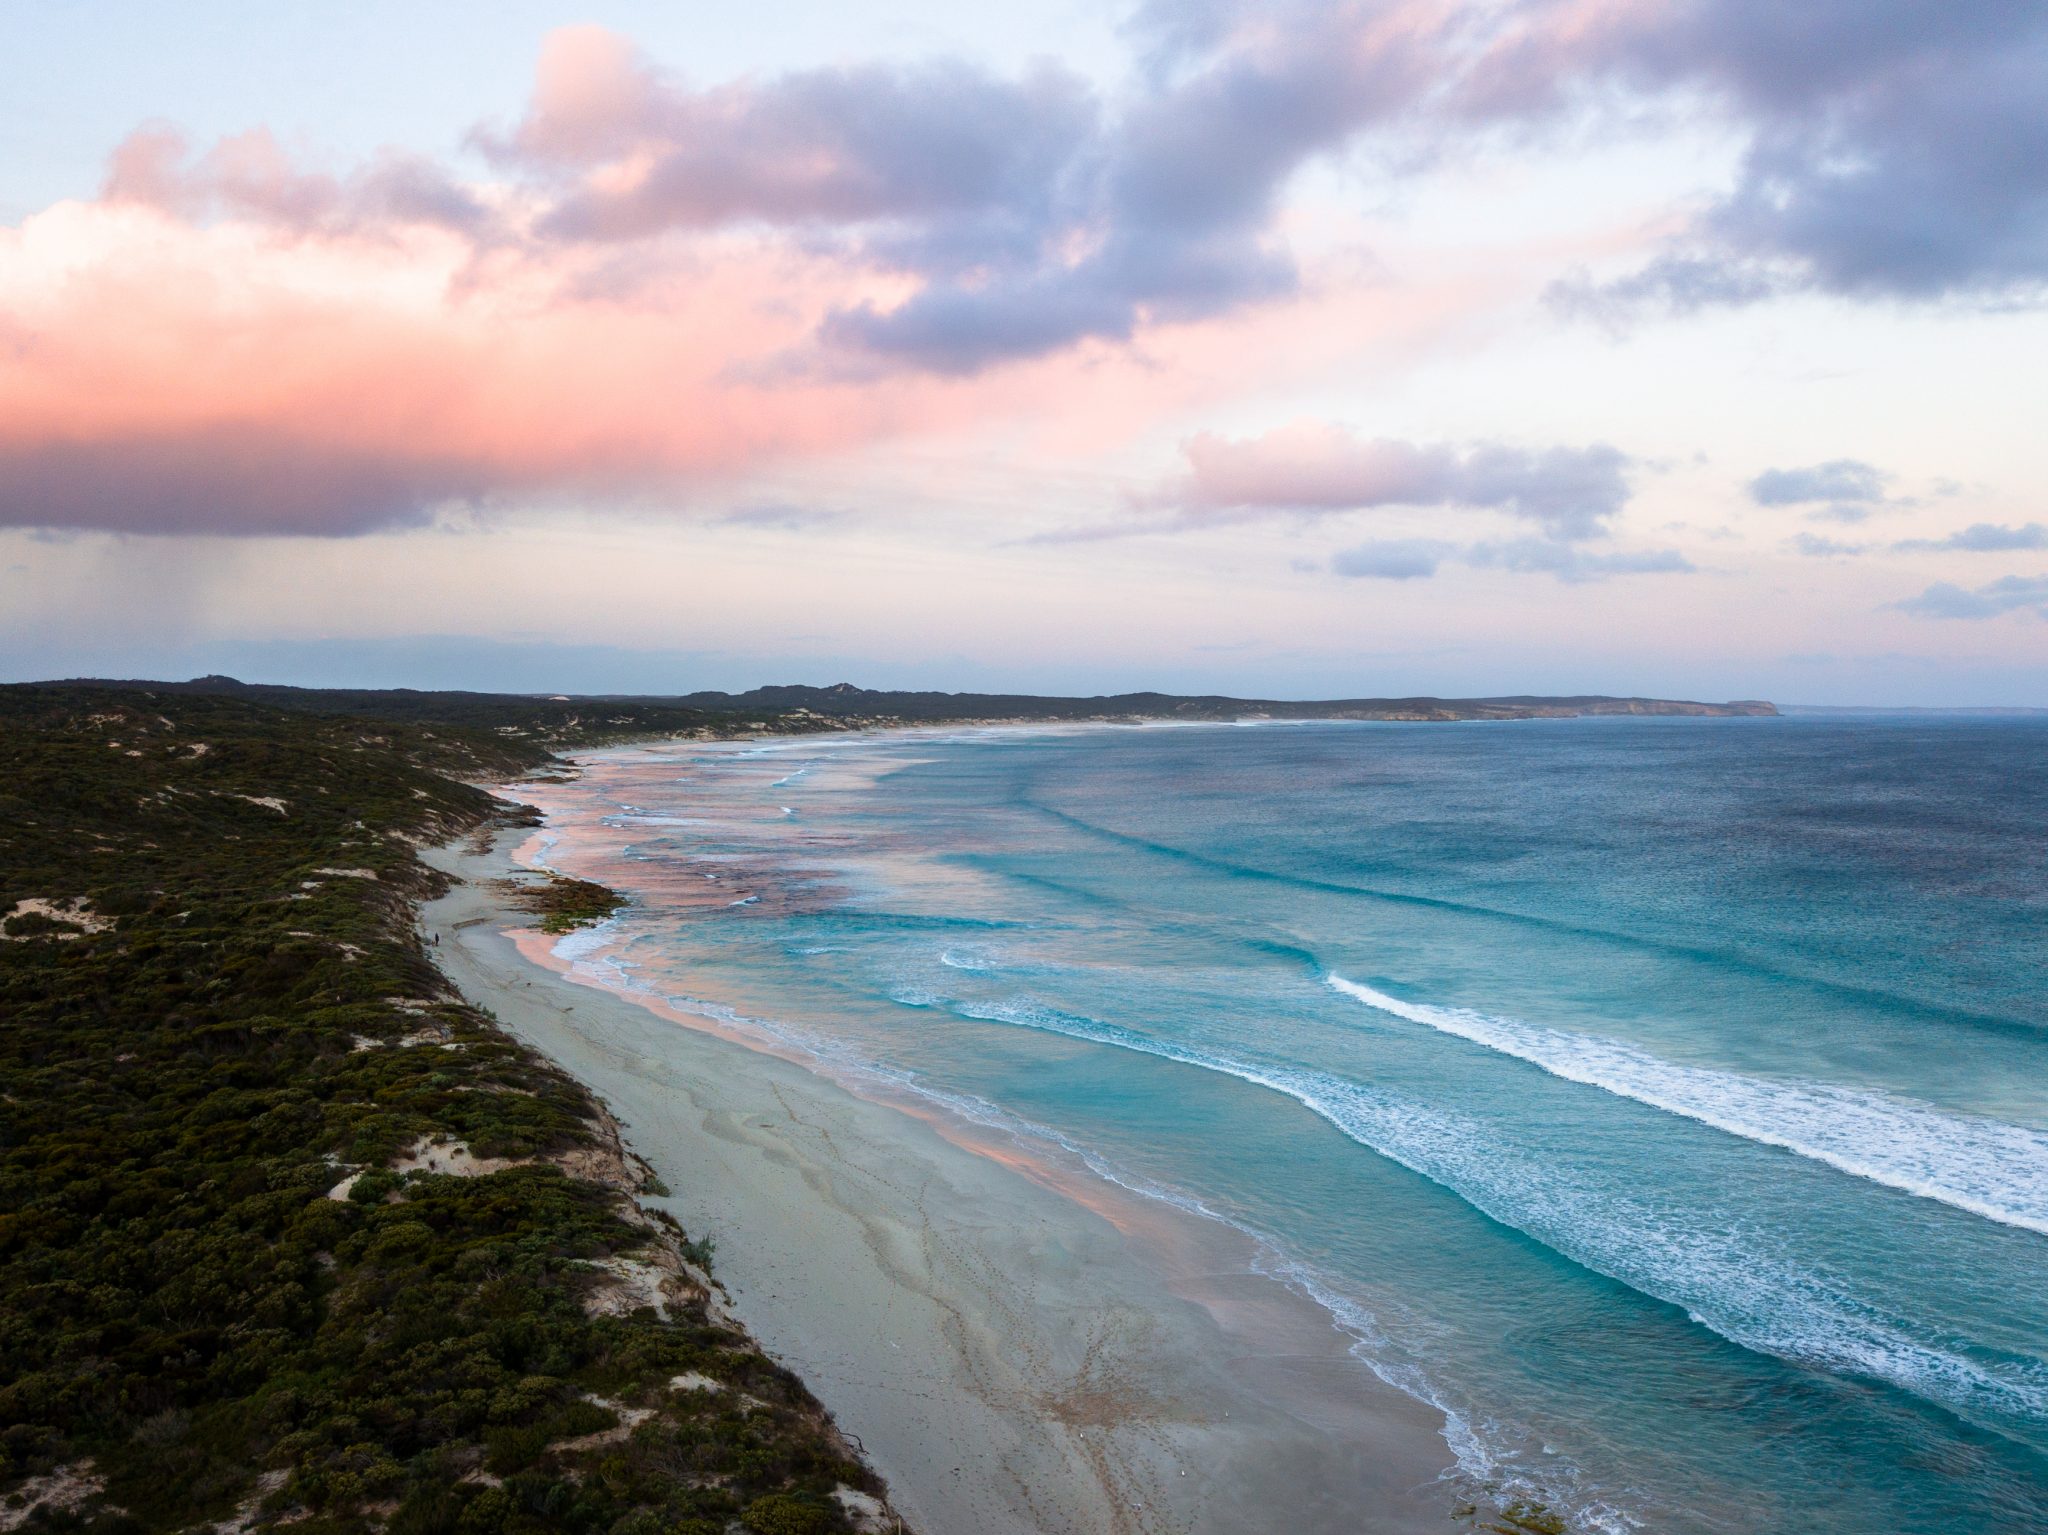 Are you looking for the best place to visit in South Australia? Kangaroo Island has so much to offer! From incredible wildlife, pristine beaches, rugged coastline and insanely good local food and wine, it's somewhere you cannot miss. Here's my guide to the top things to do on Kangaroo Island and my ultimate 4 day Kangaroo Island itinerary road trip. #kangarooisland #southaustralia #southaustralia #visitkangarooisland #visitsouthaustralia #backpackingaustralia #australiaroadtrips #topplacesinaustralia